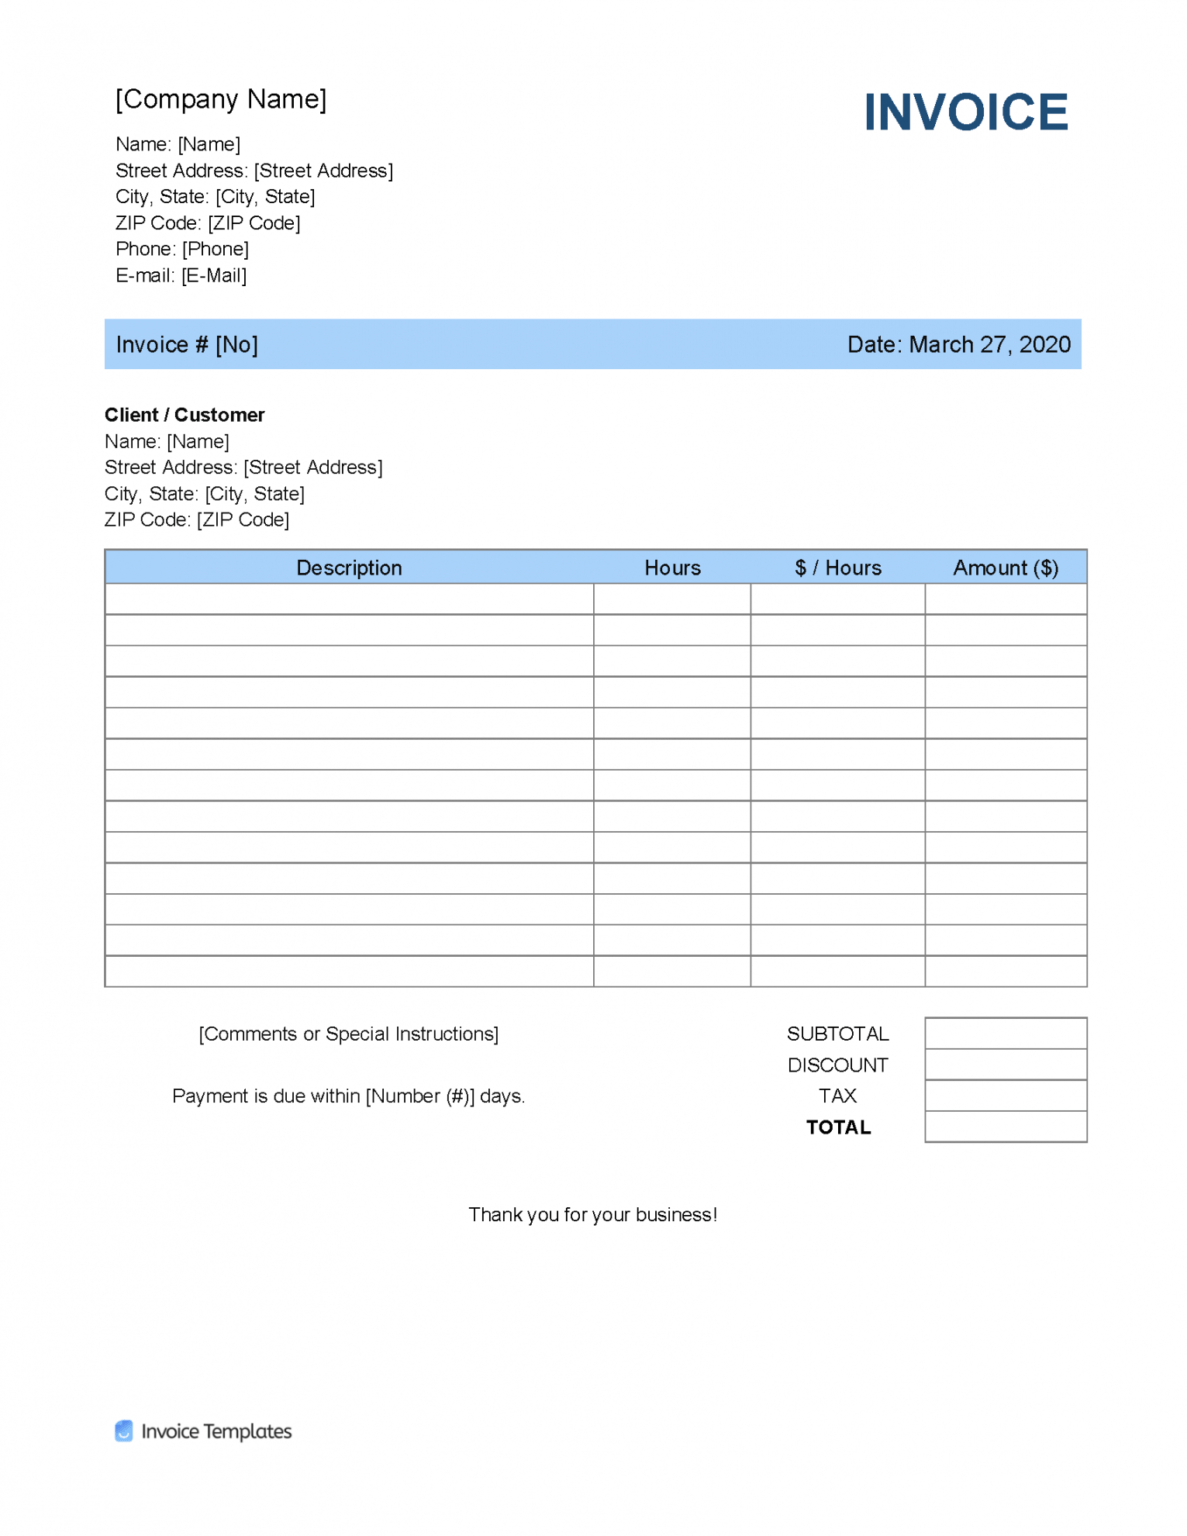 Free Download Invoice Template Excel Invoice Template Ideas ASKxz